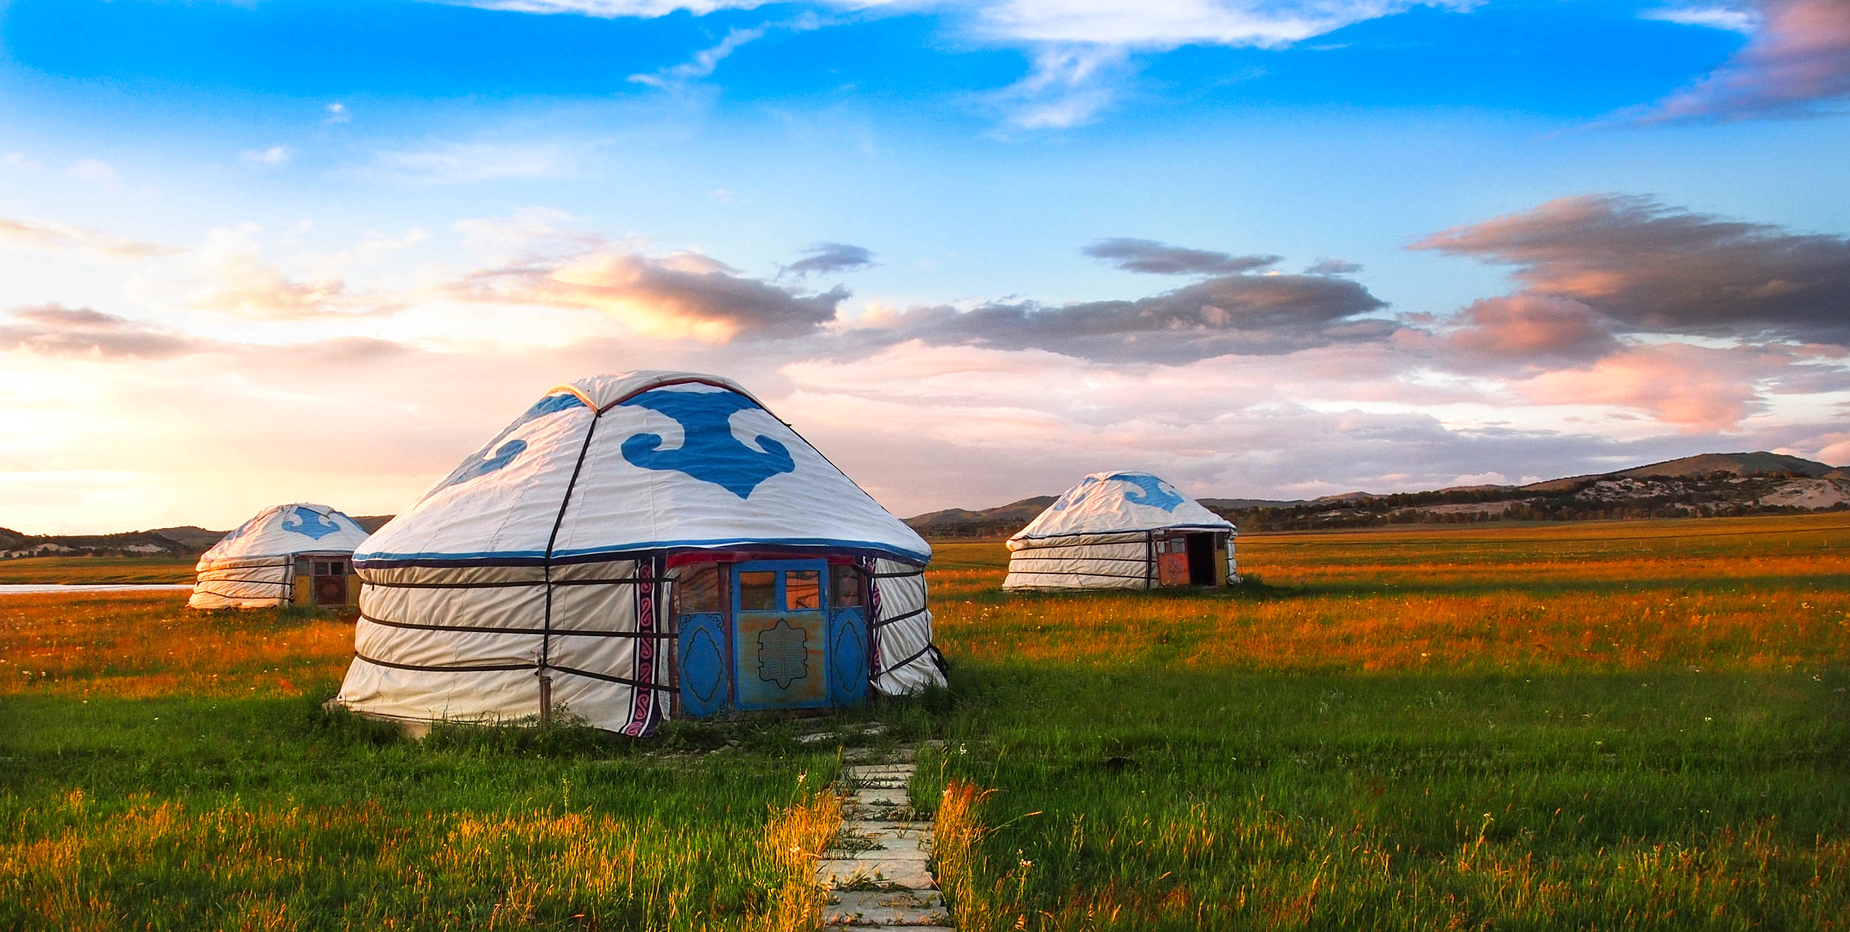 Mongolian huts during the day